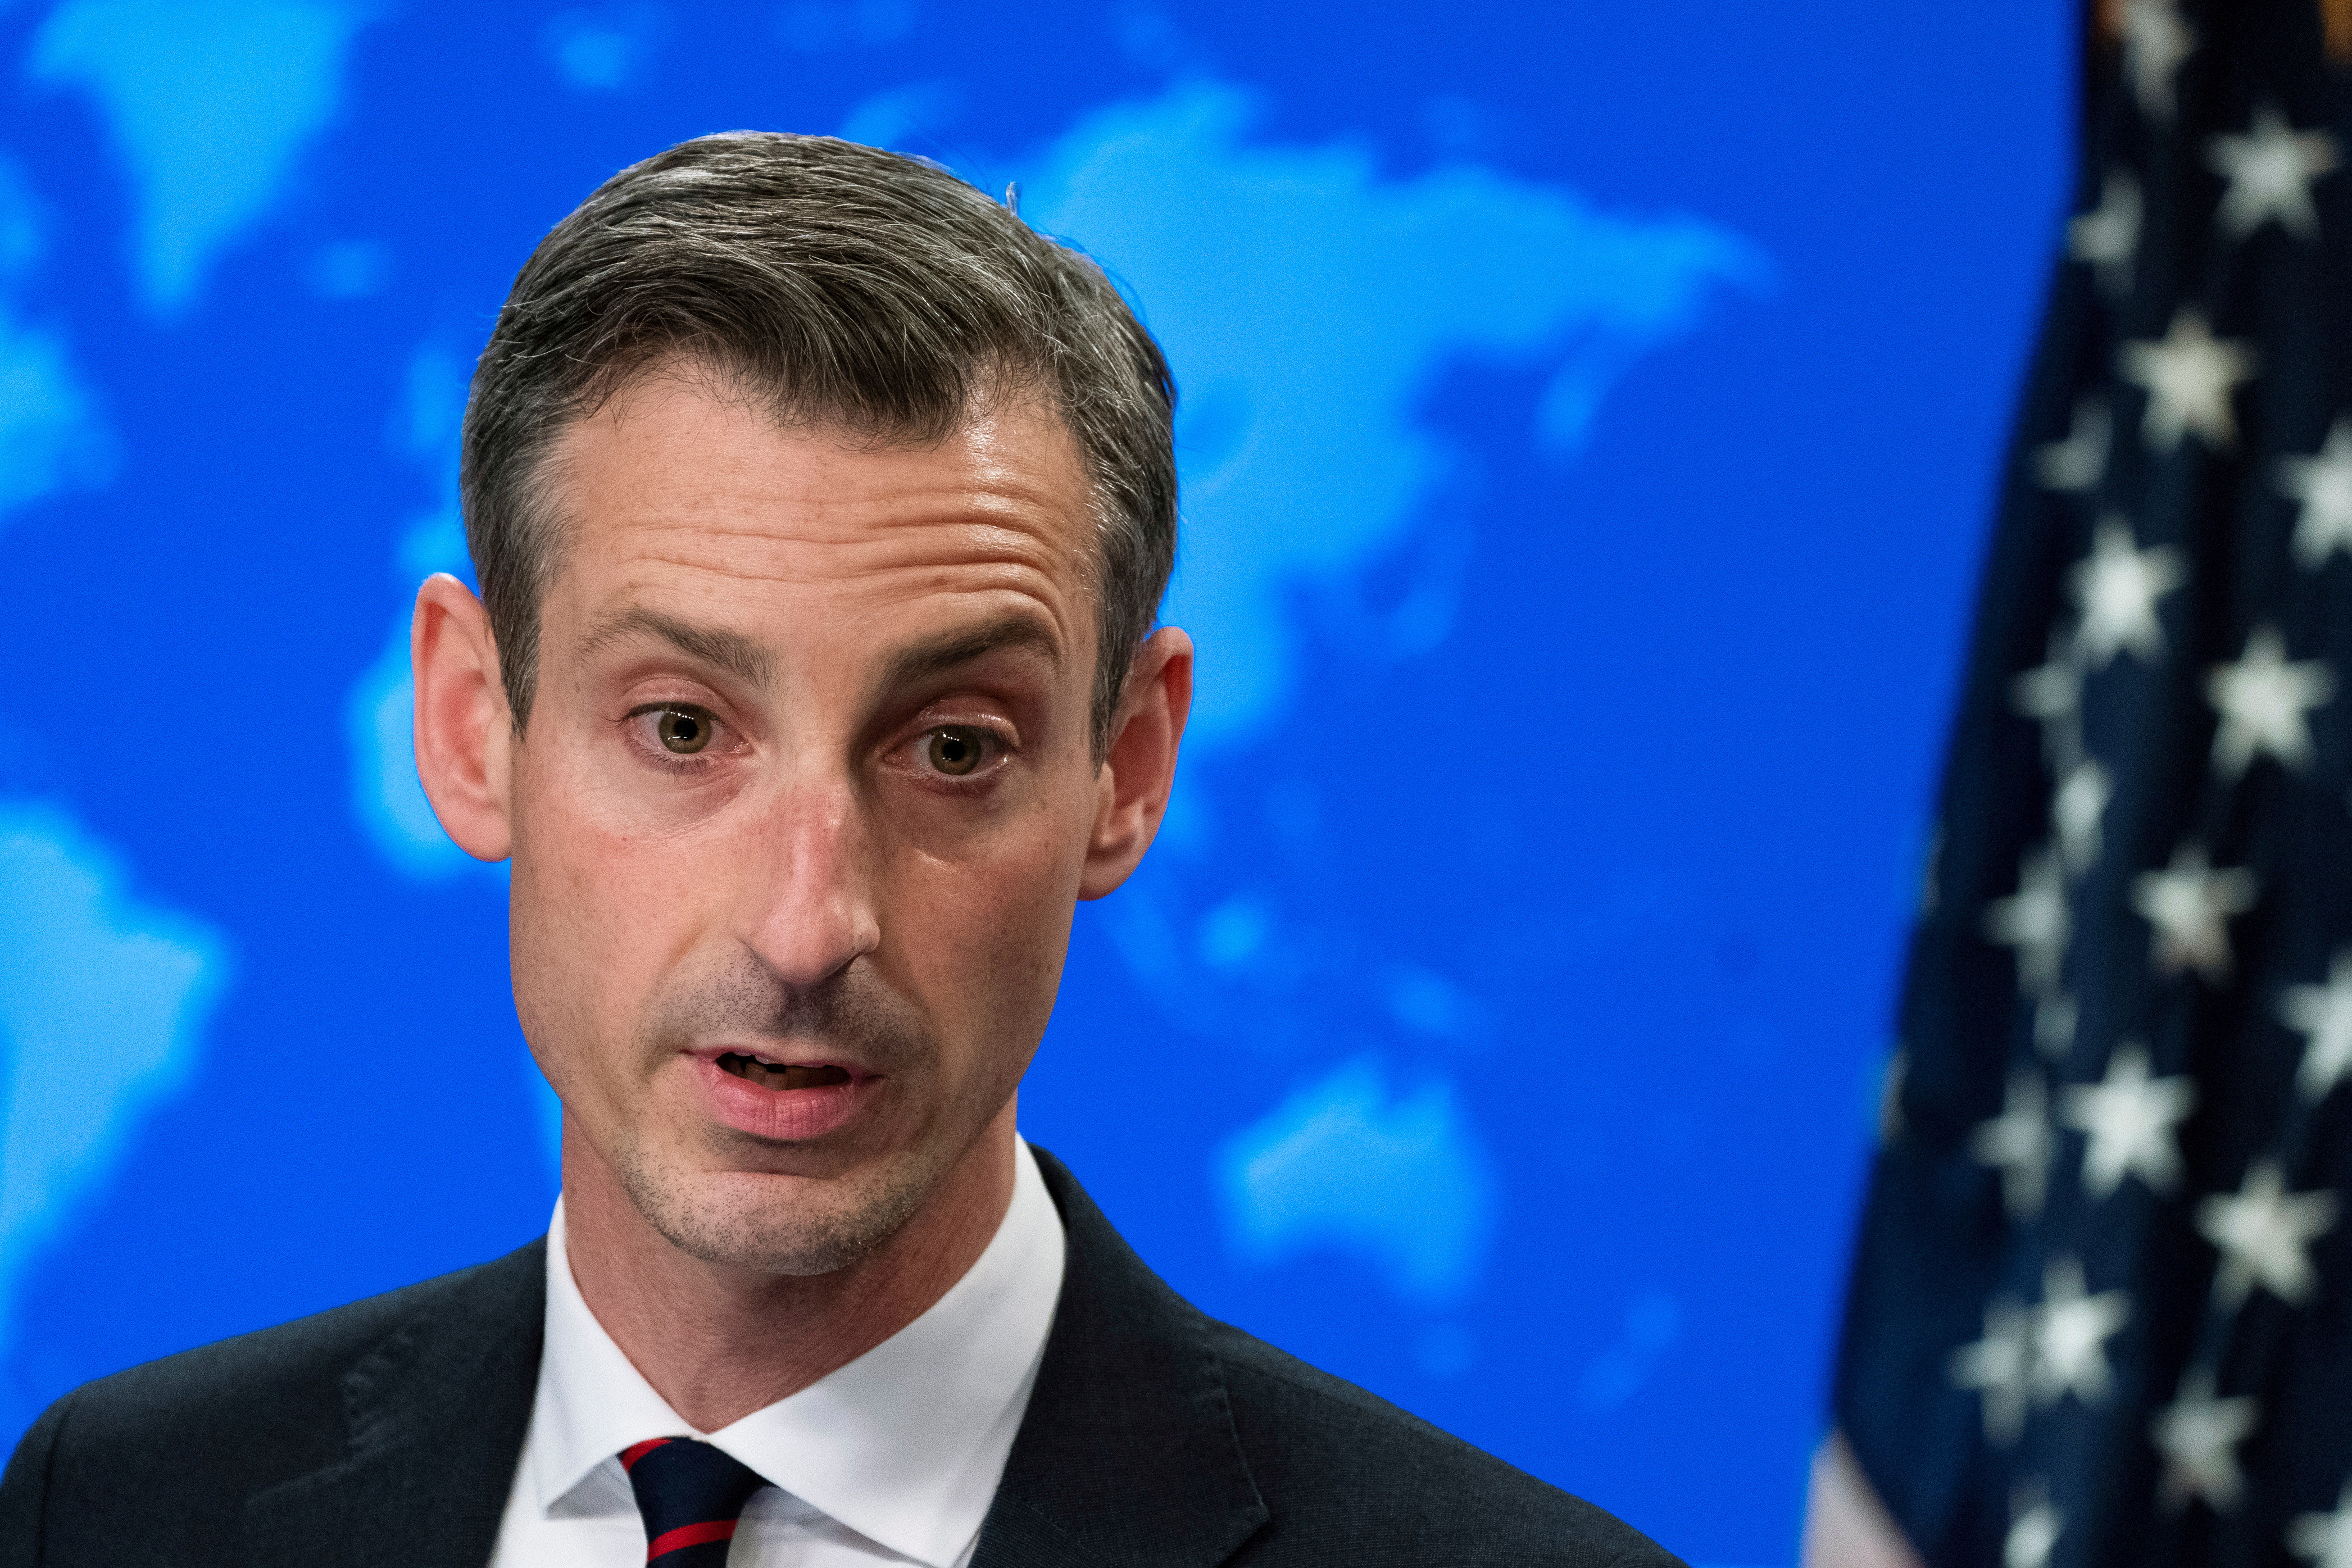 FILE PHOTO: U.S. State Department spokesperson Ned Price speaks during a news conference in Washington, U.S. March 10, 2022. Manuel Balce Ceneta/Pool via REUTERS/File Photo